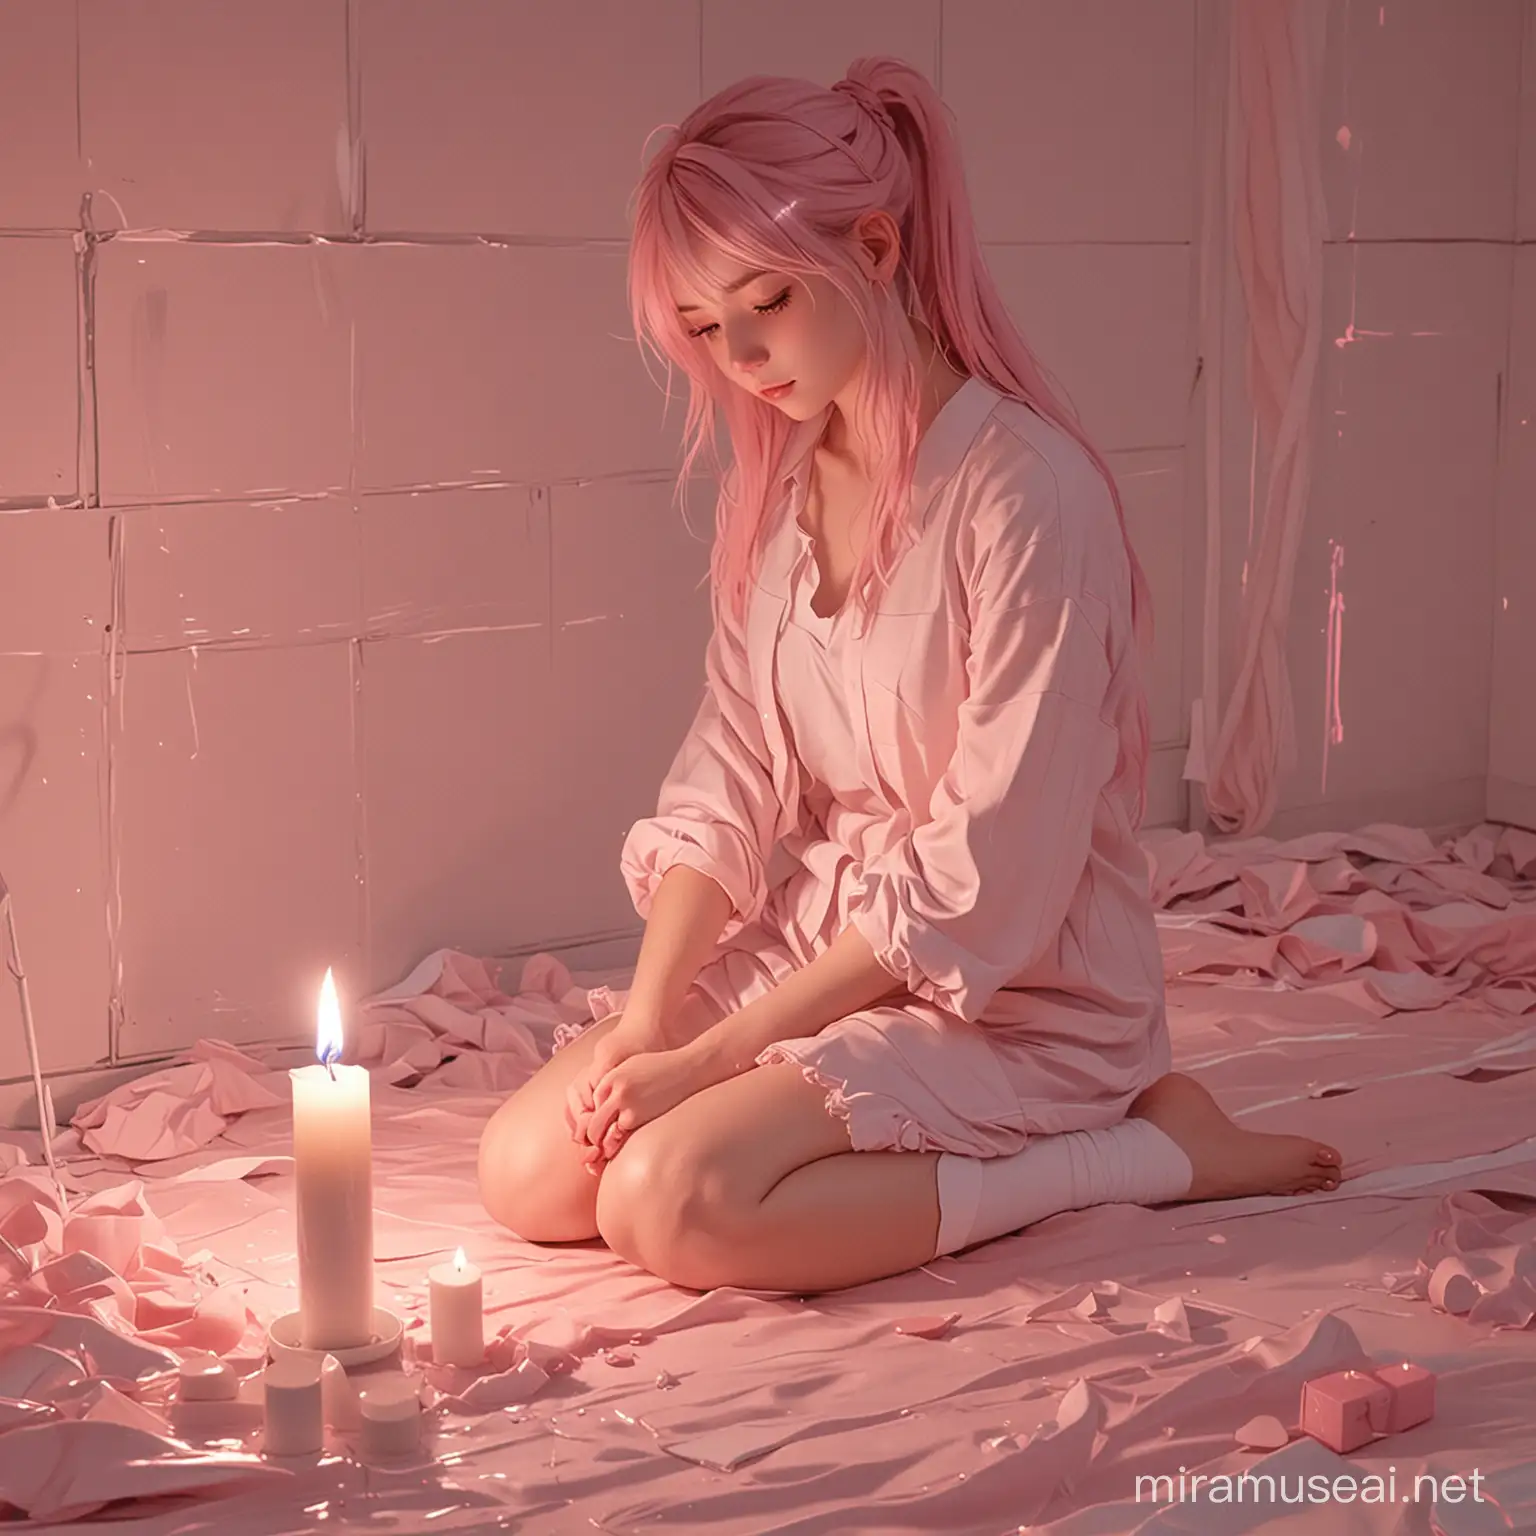 Anime Characters in Candlelit Serenity with PseudoRealistic Details